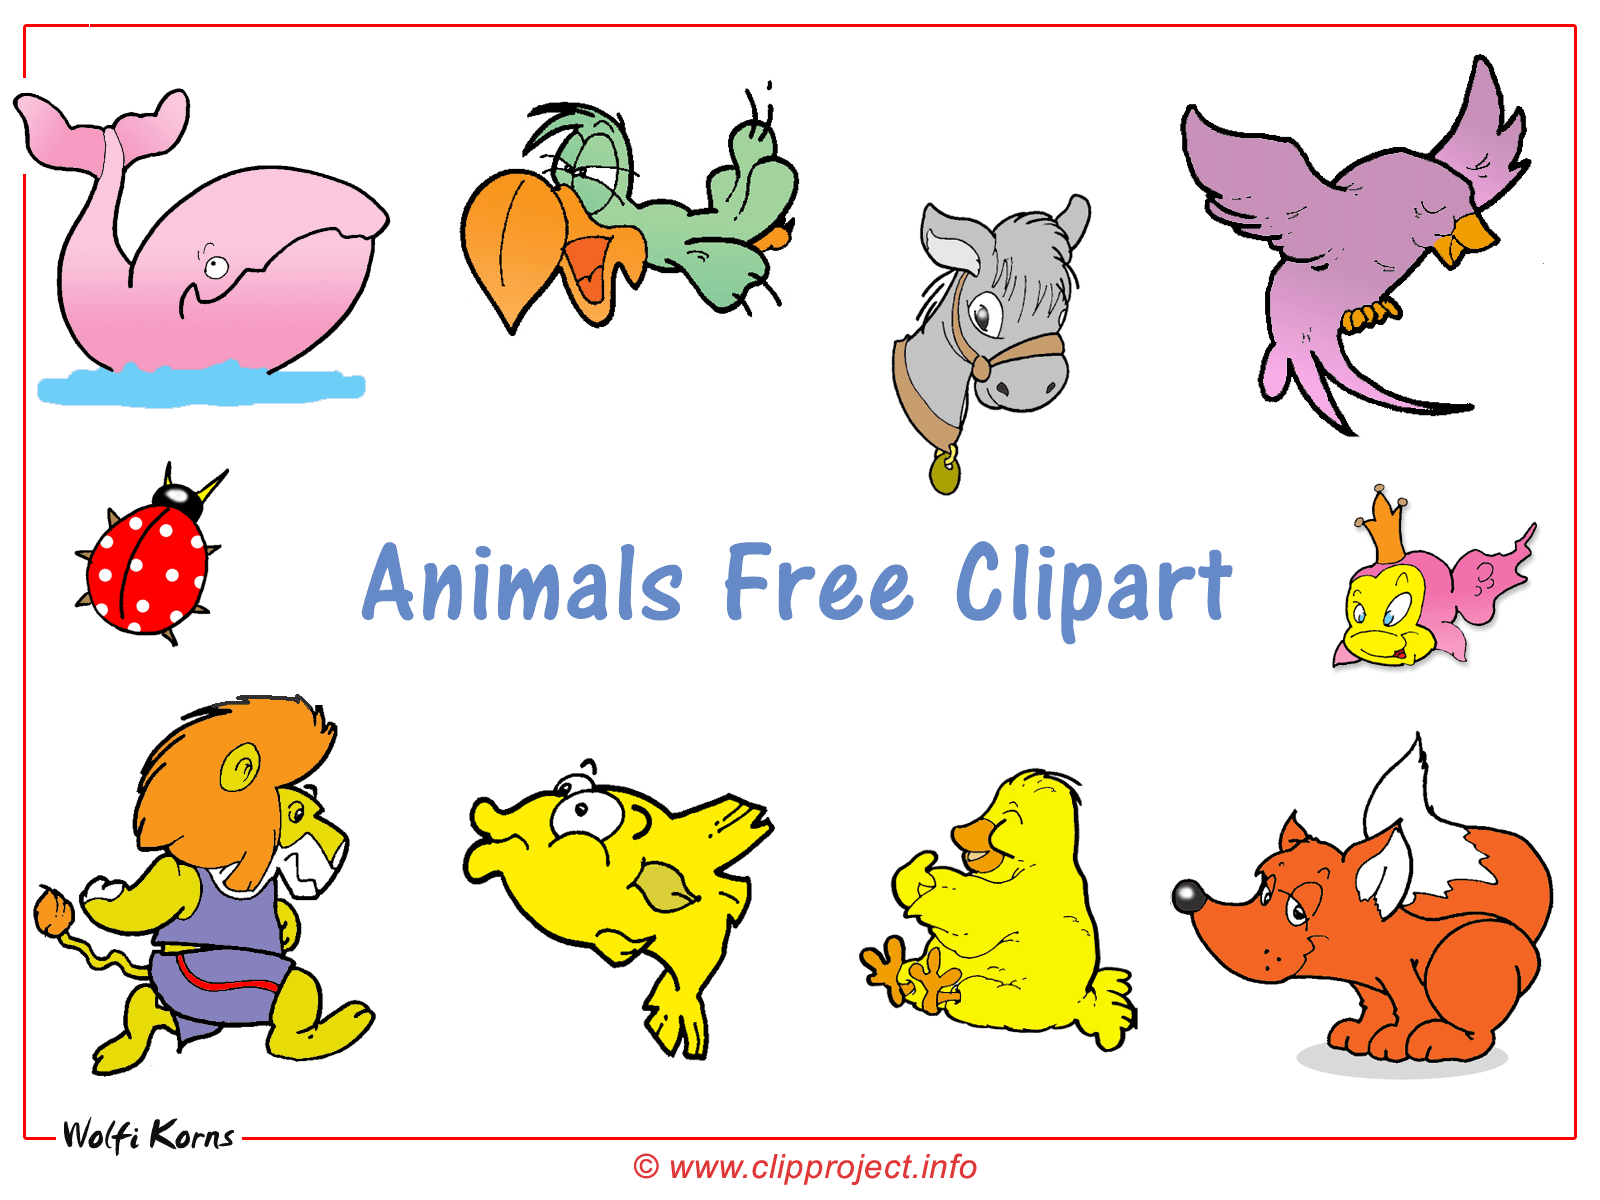 Clipart free download images